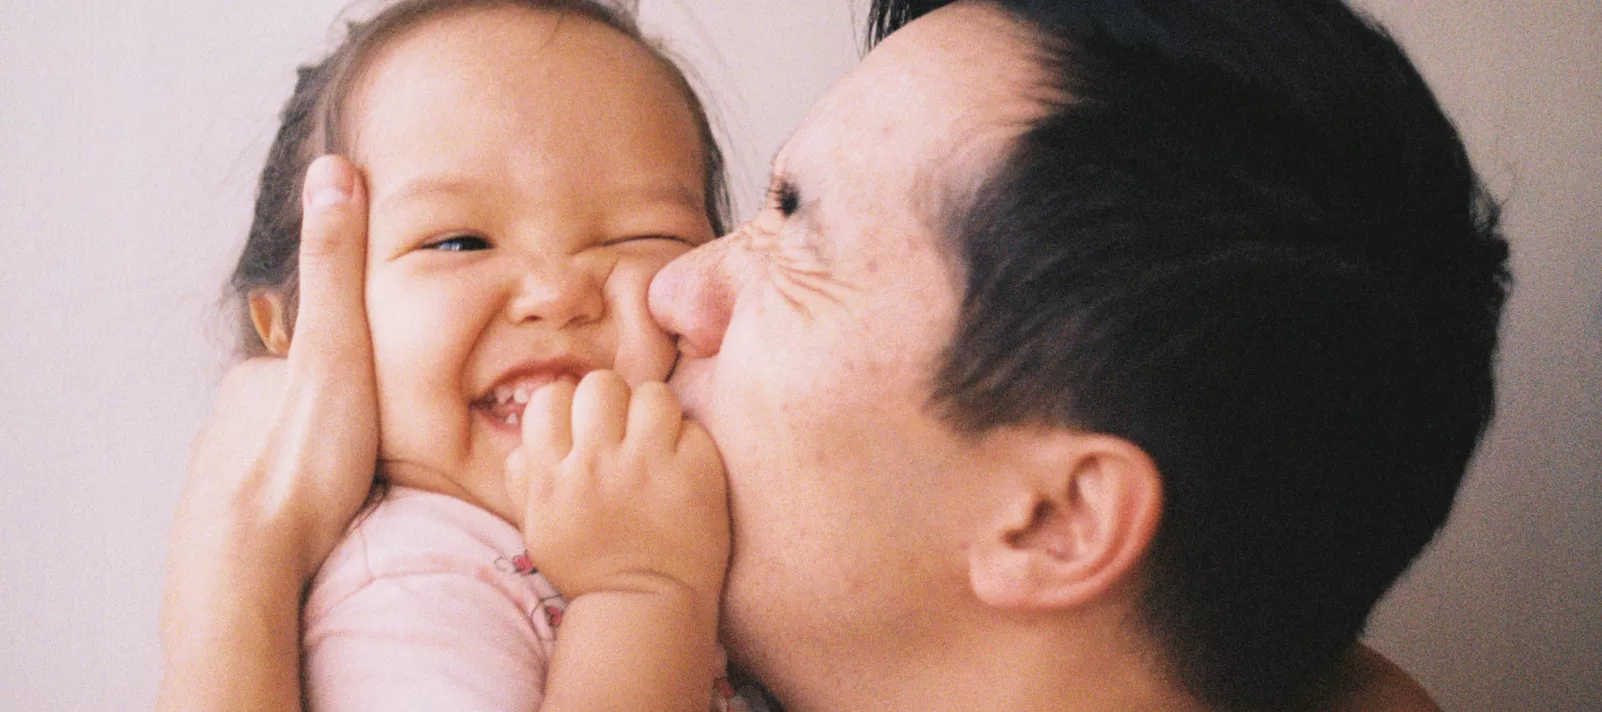 UNICEF Parenting: Tips and resources for parents - A father kisses his child